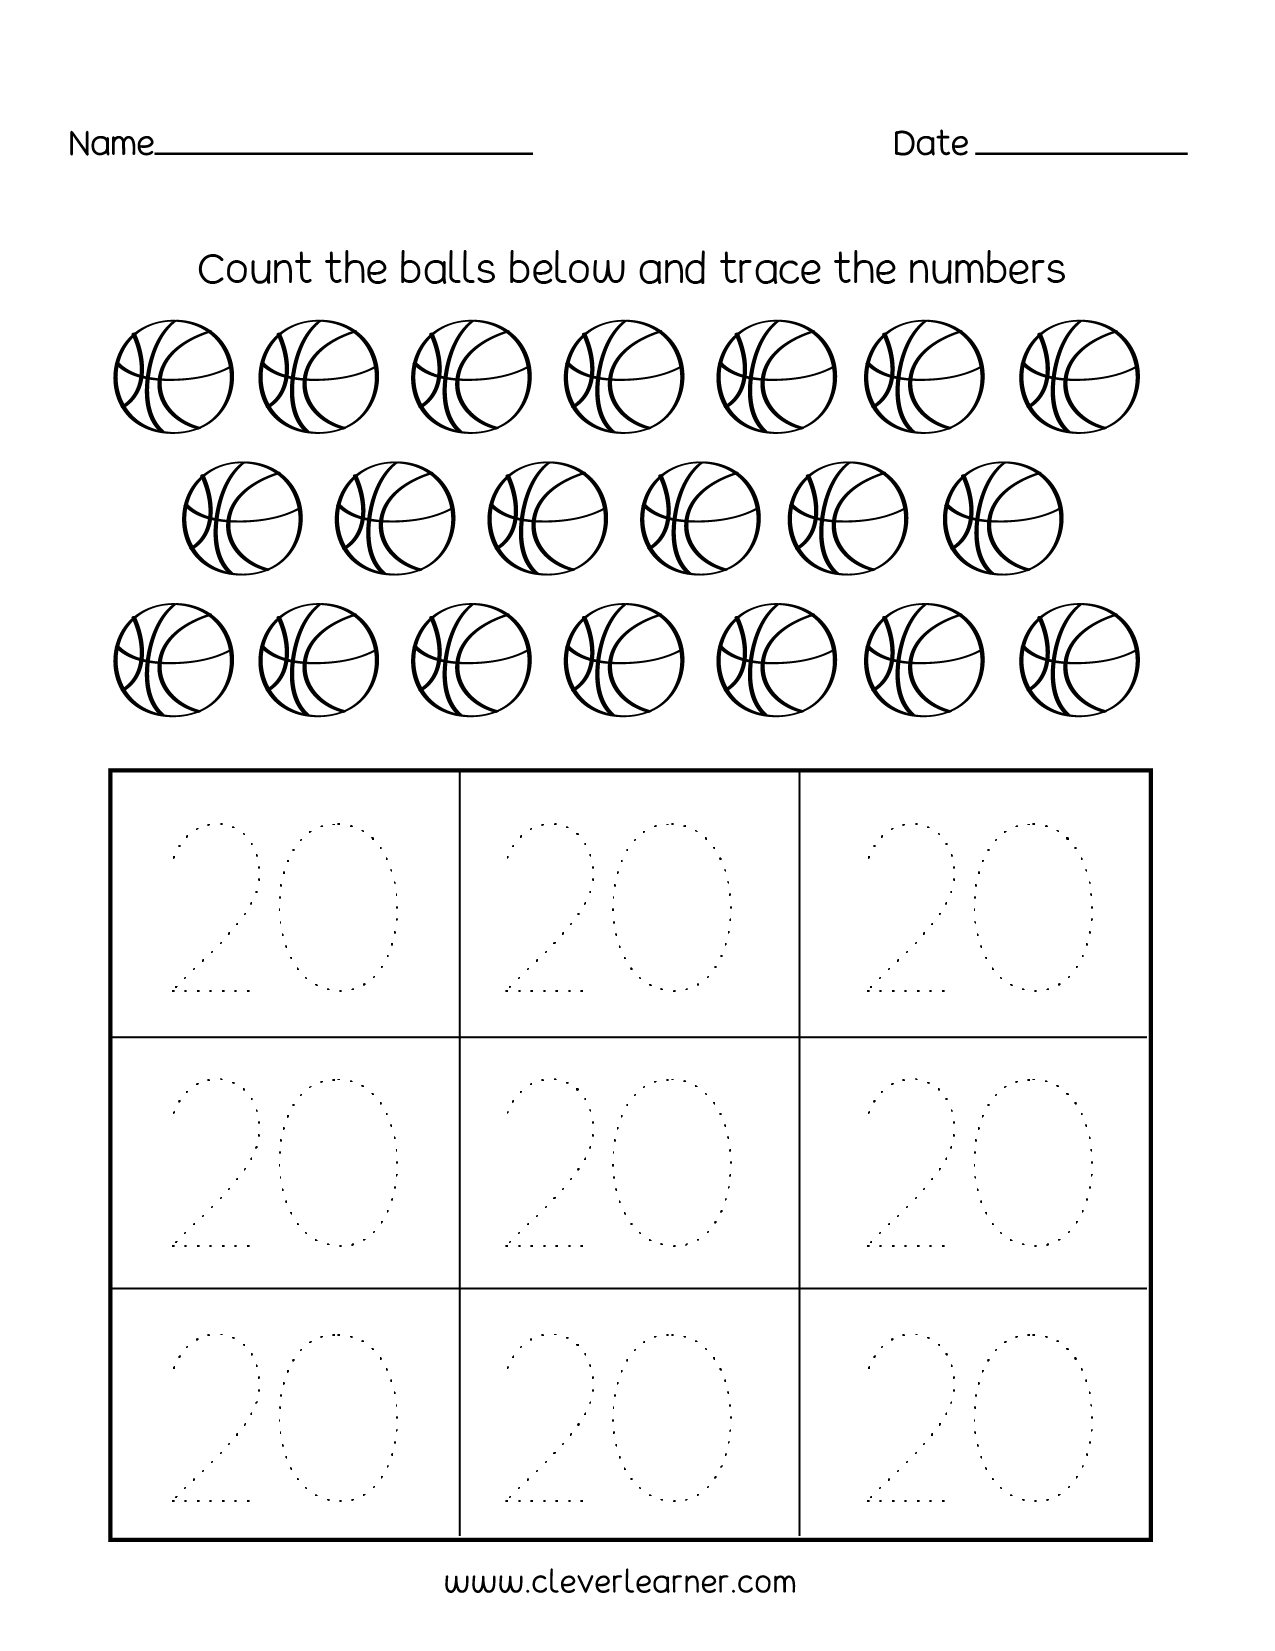 printable-number-20-worksheets-activity-shelter-count-to-20-printable